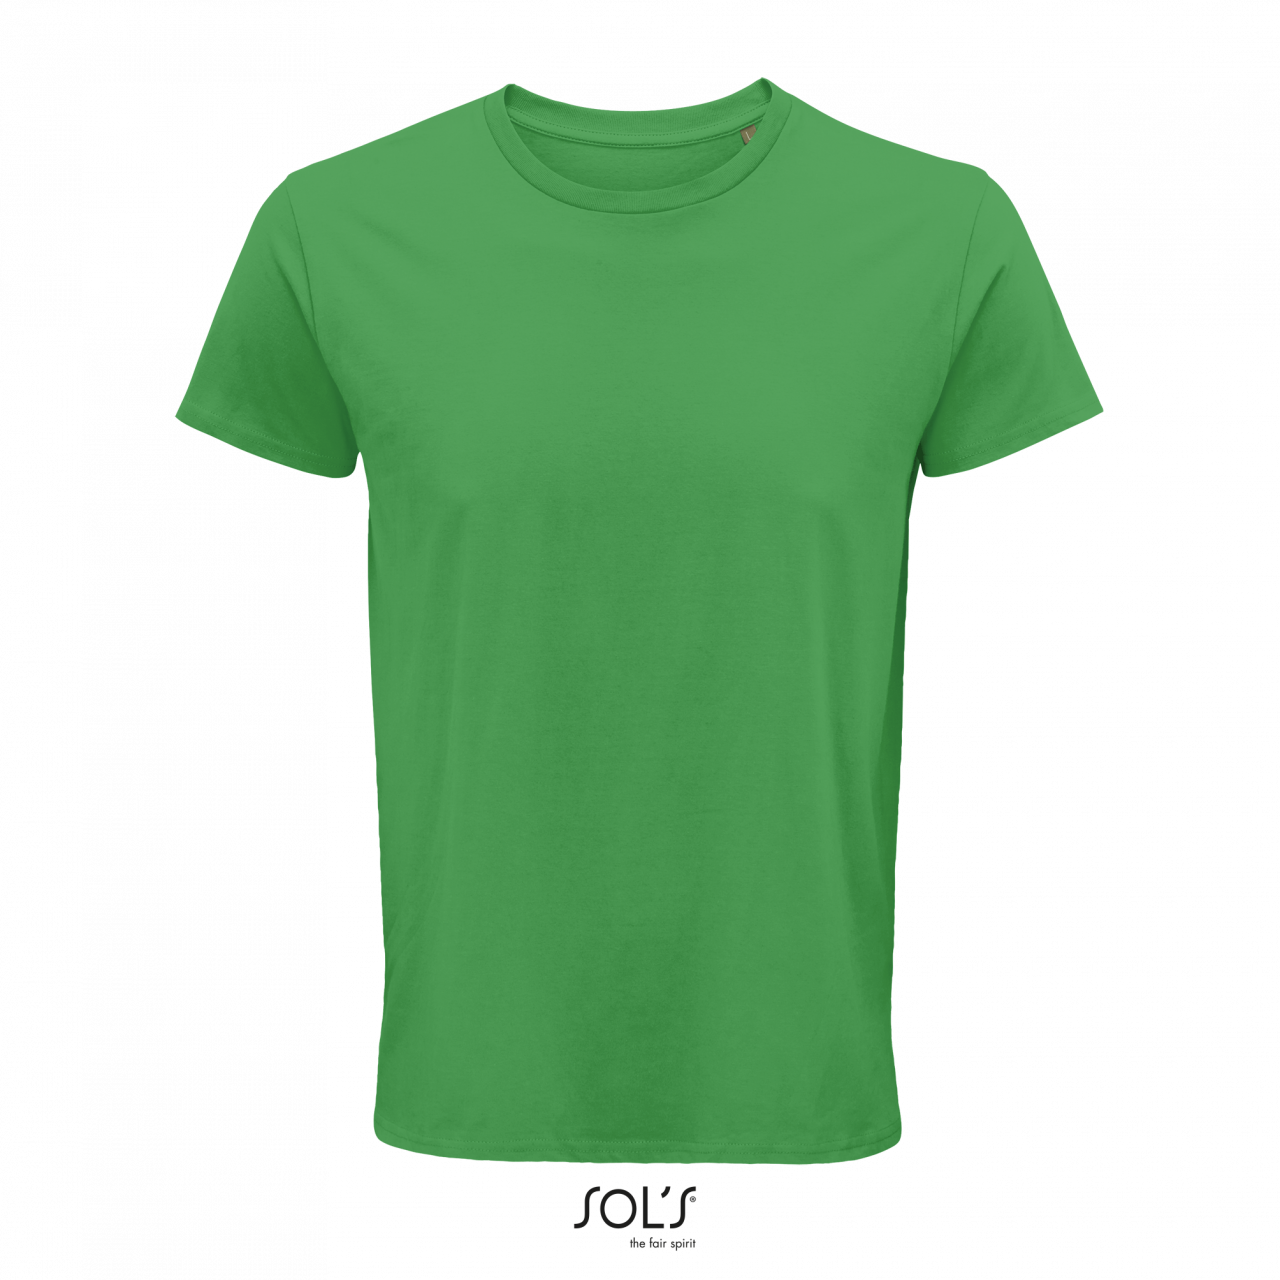 Sol's Crusader Men - Round-neck Fitted Jersey T-shirt - green